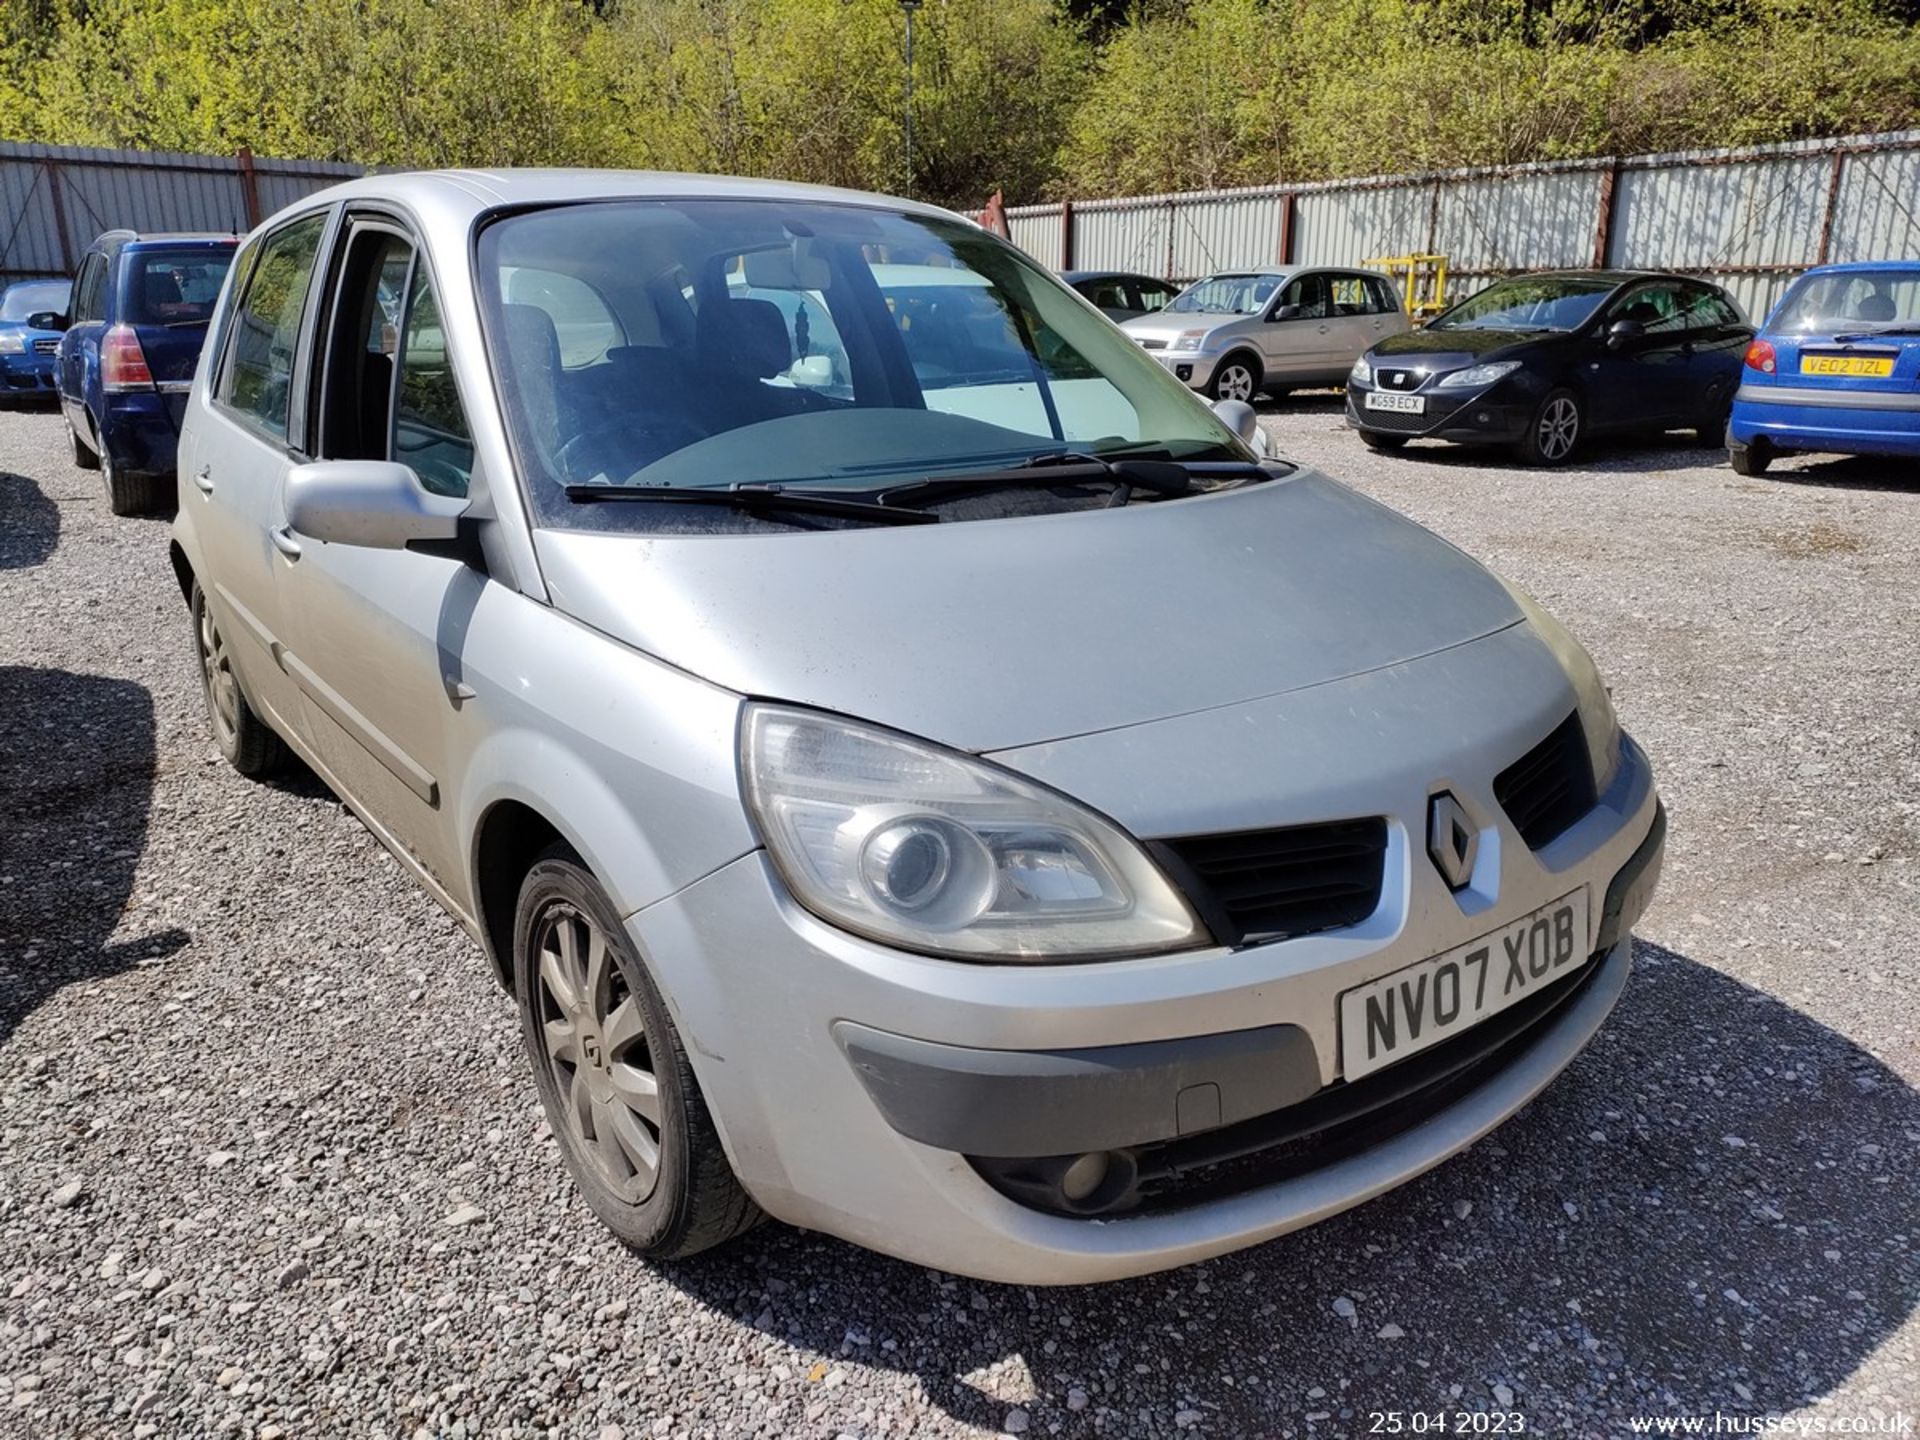 07/07 RENAULT SCENIC DYN VVT - 1598cc 5dr MPV (Silver) - Image 6 of 34